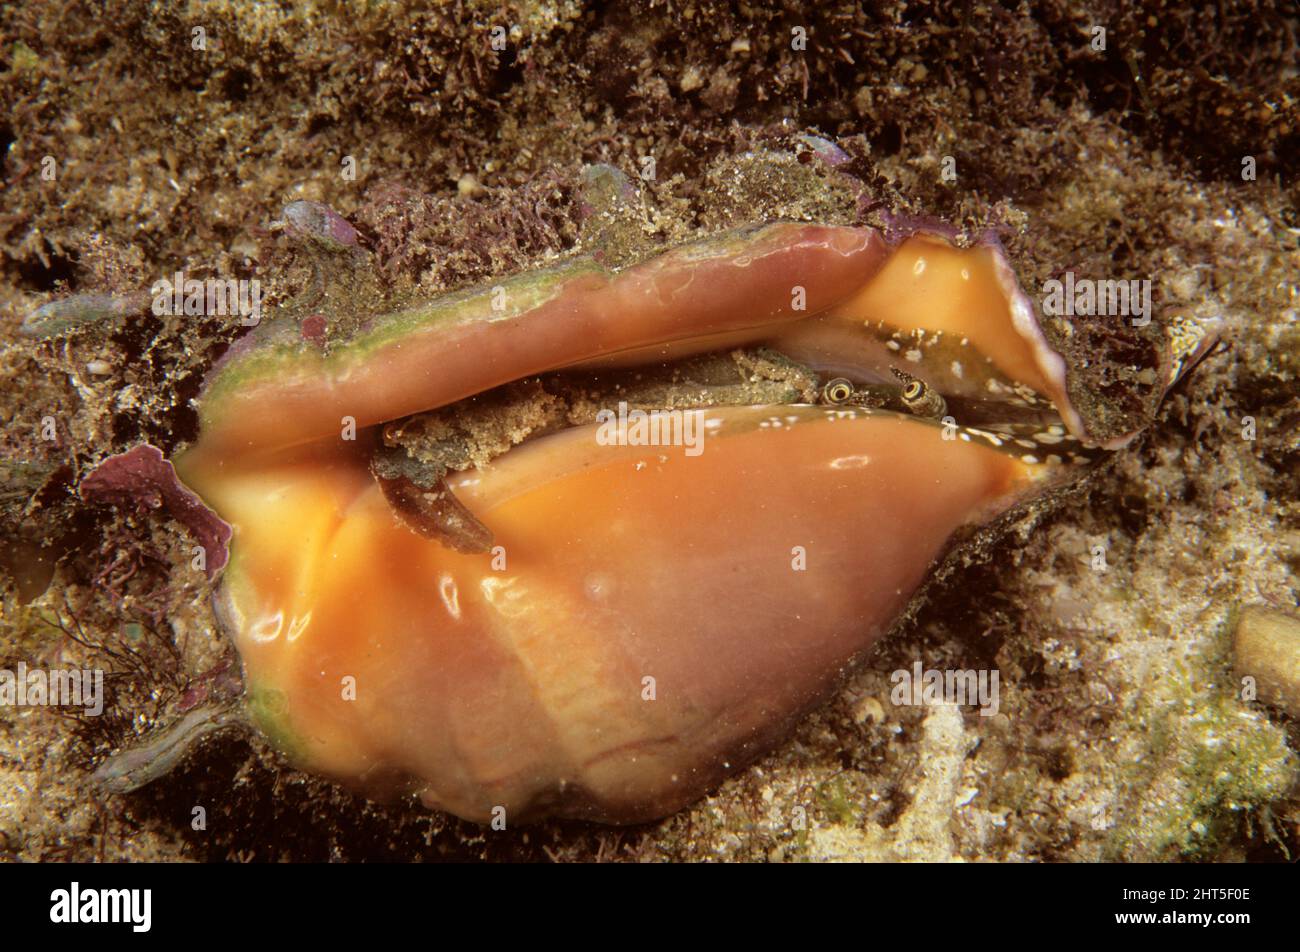 A medium-sized conch (Strombus sp.), Beady eyes peep out from an overturned shell. Stock Photo